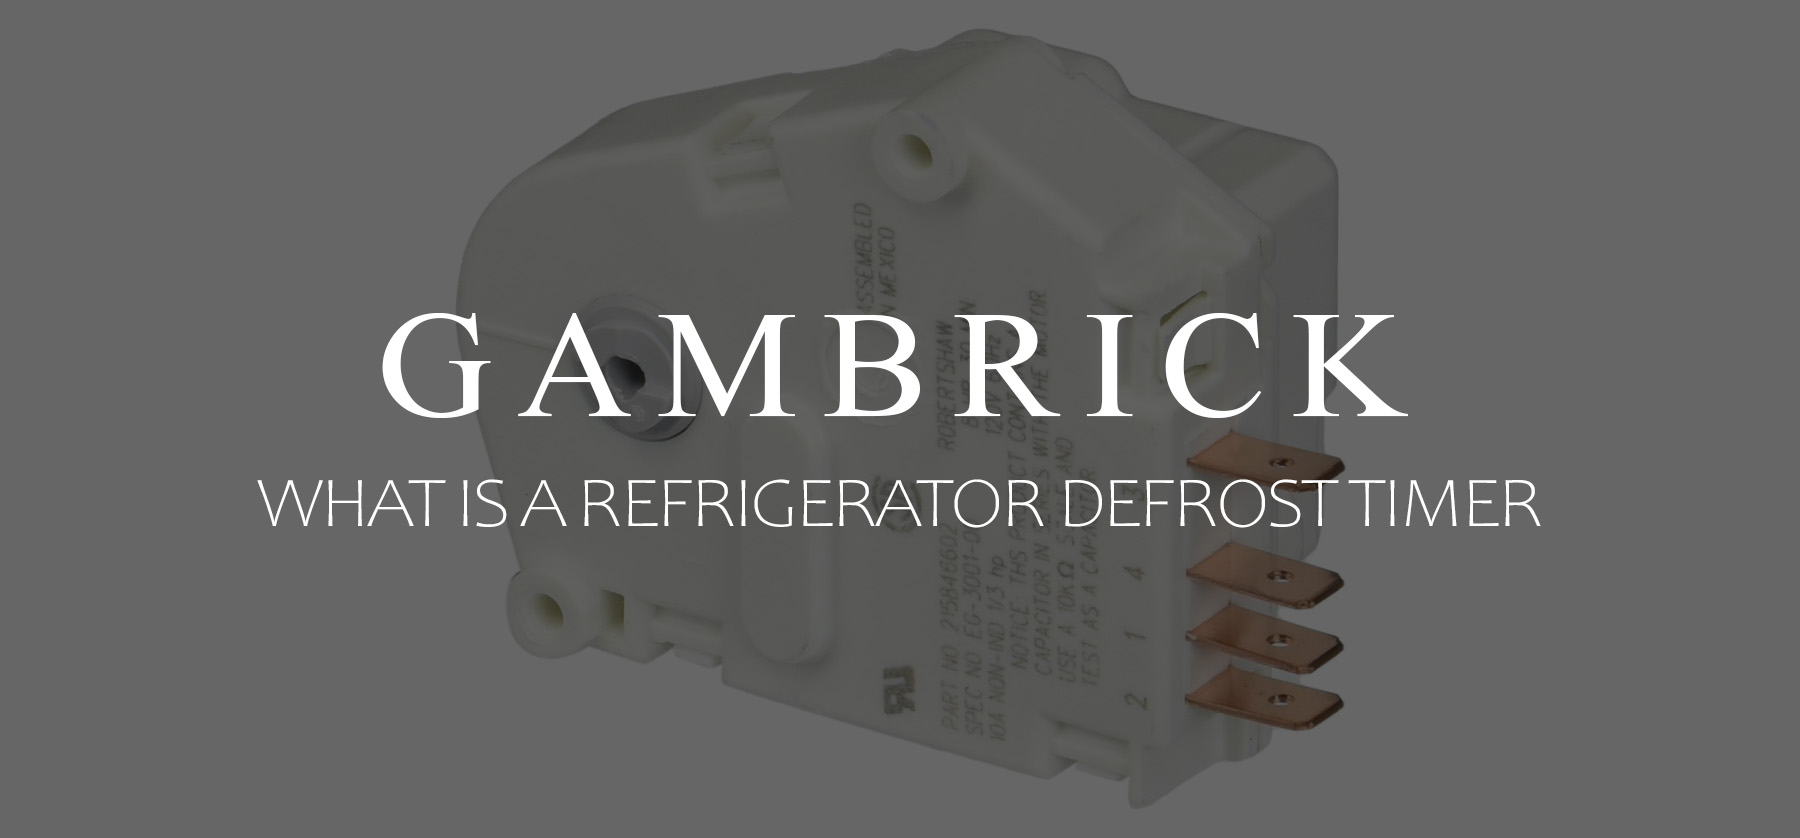 what is a refrigerator defrost timer banner 1.0